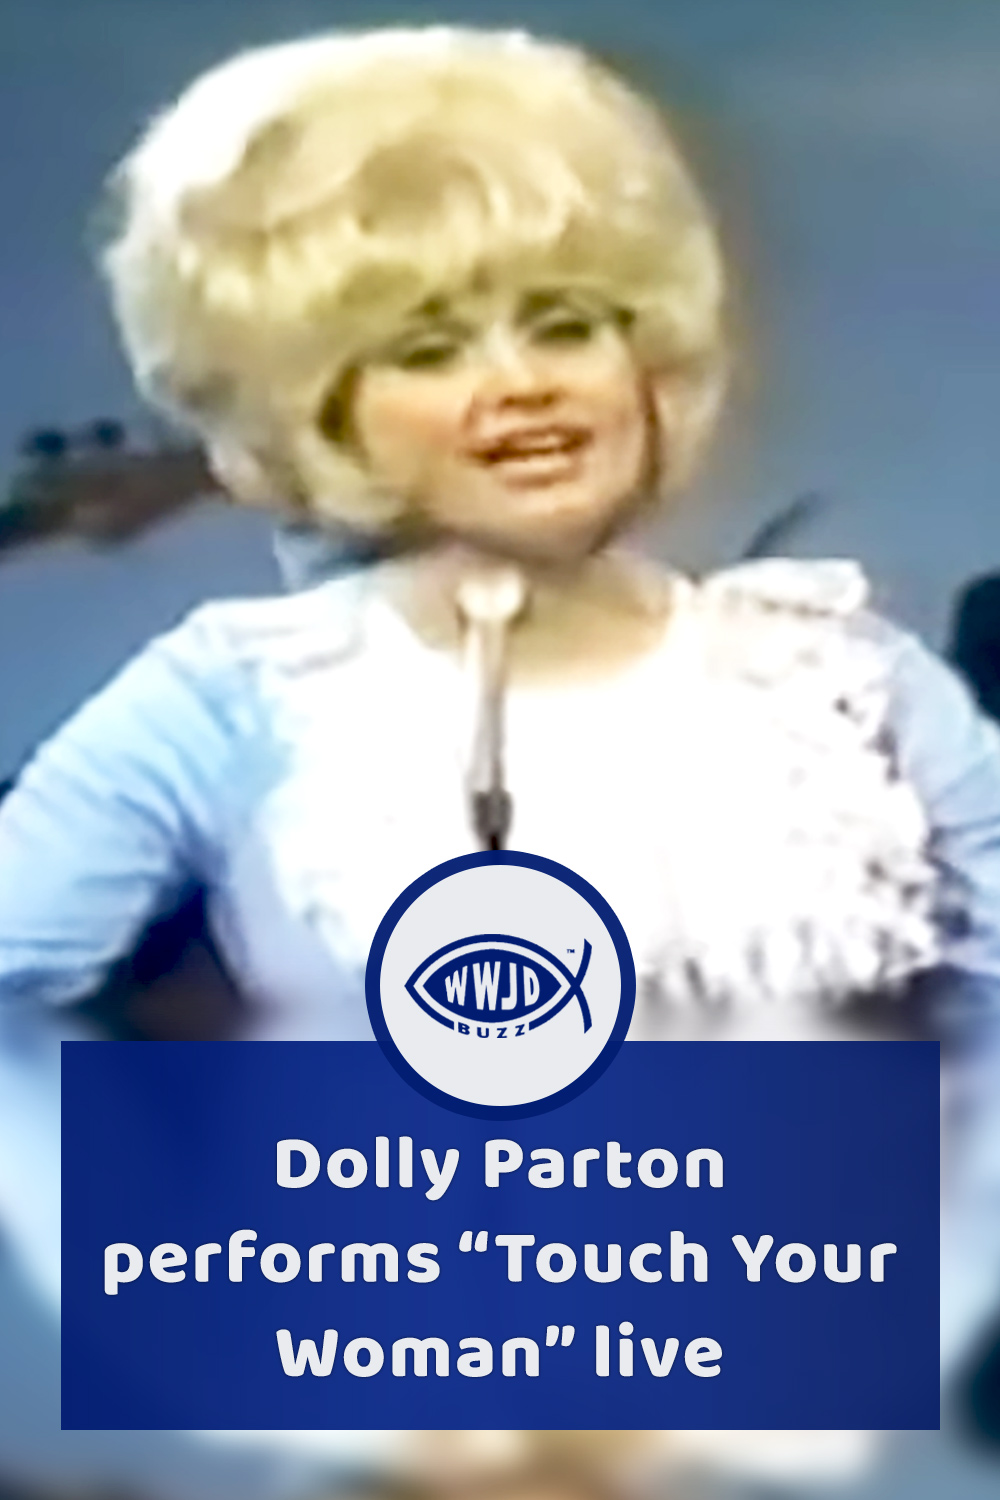 Dolly Parton performs “Touch Your Woman” live